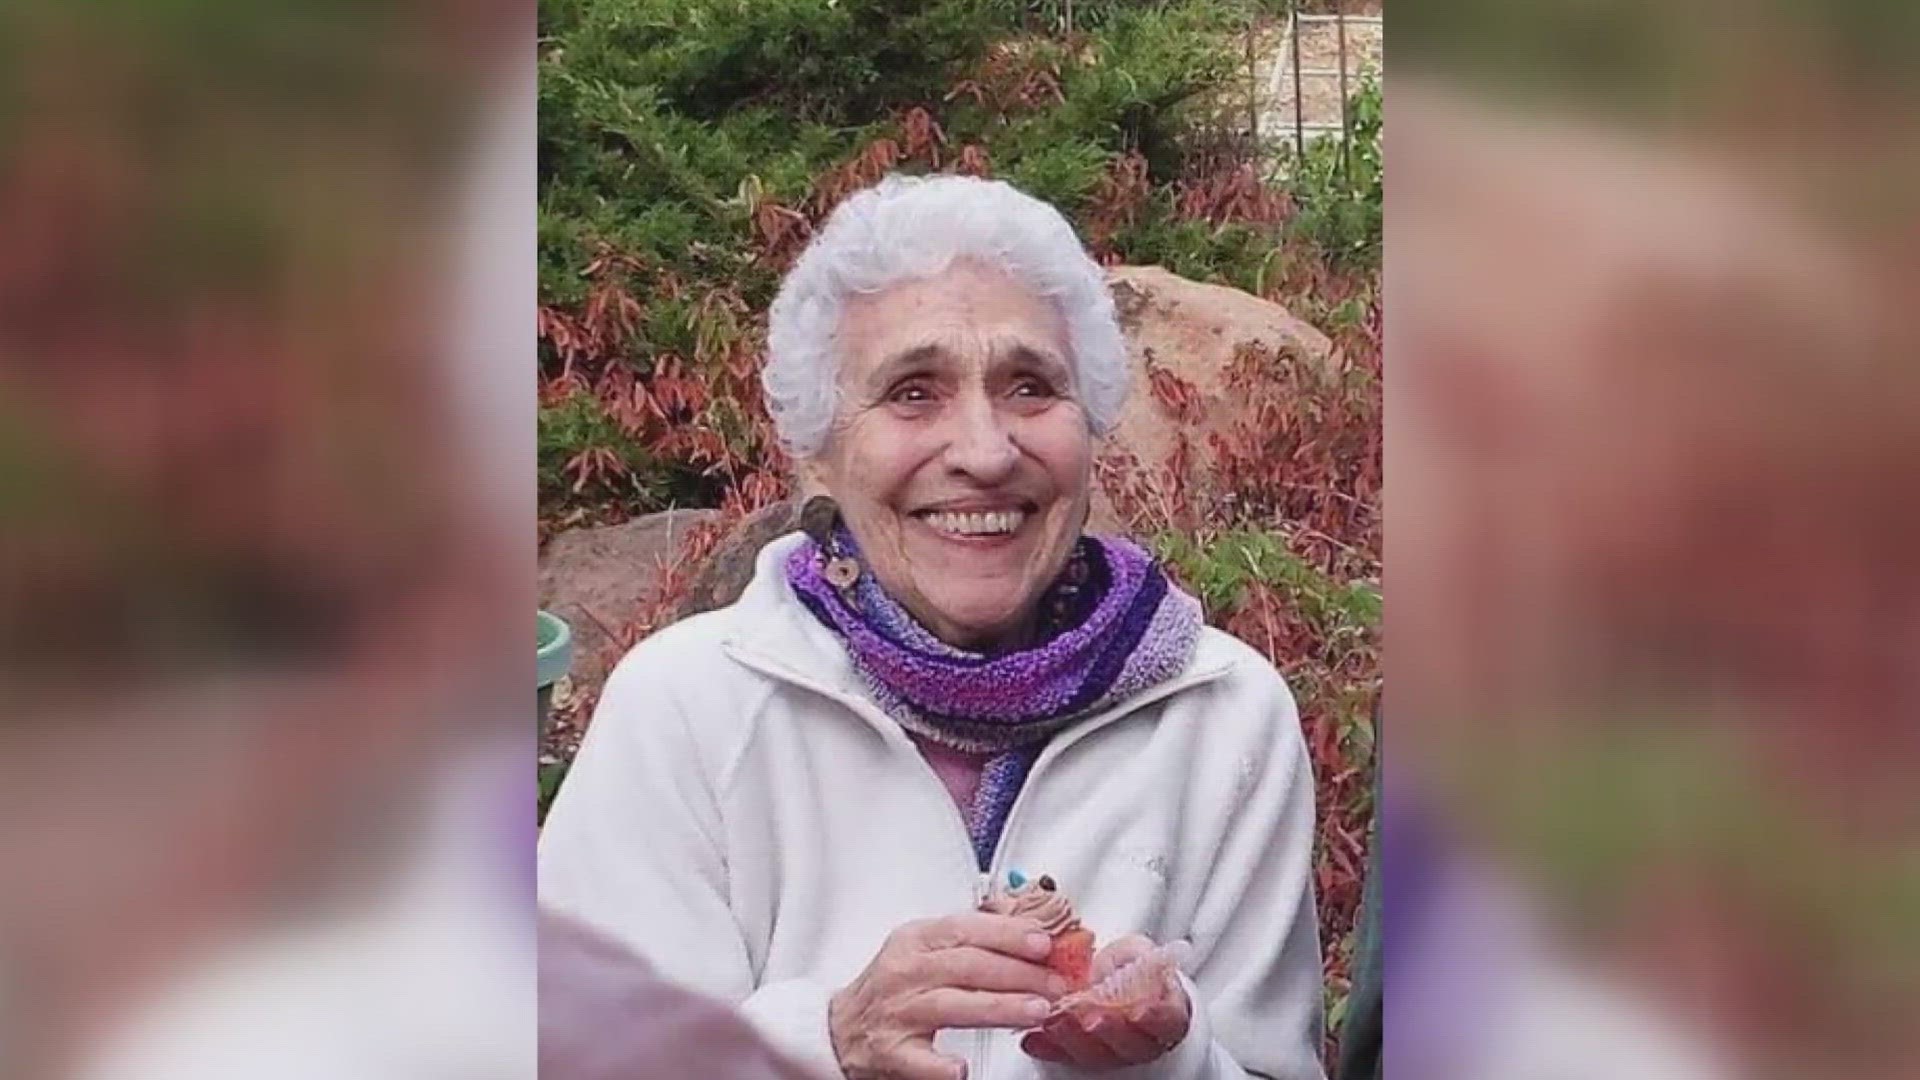 Barbara Collier escaped the Caldor Fire and was put into Brookdale Folsom Senior Living facility where her family alleges she faced physical abuse before dying.